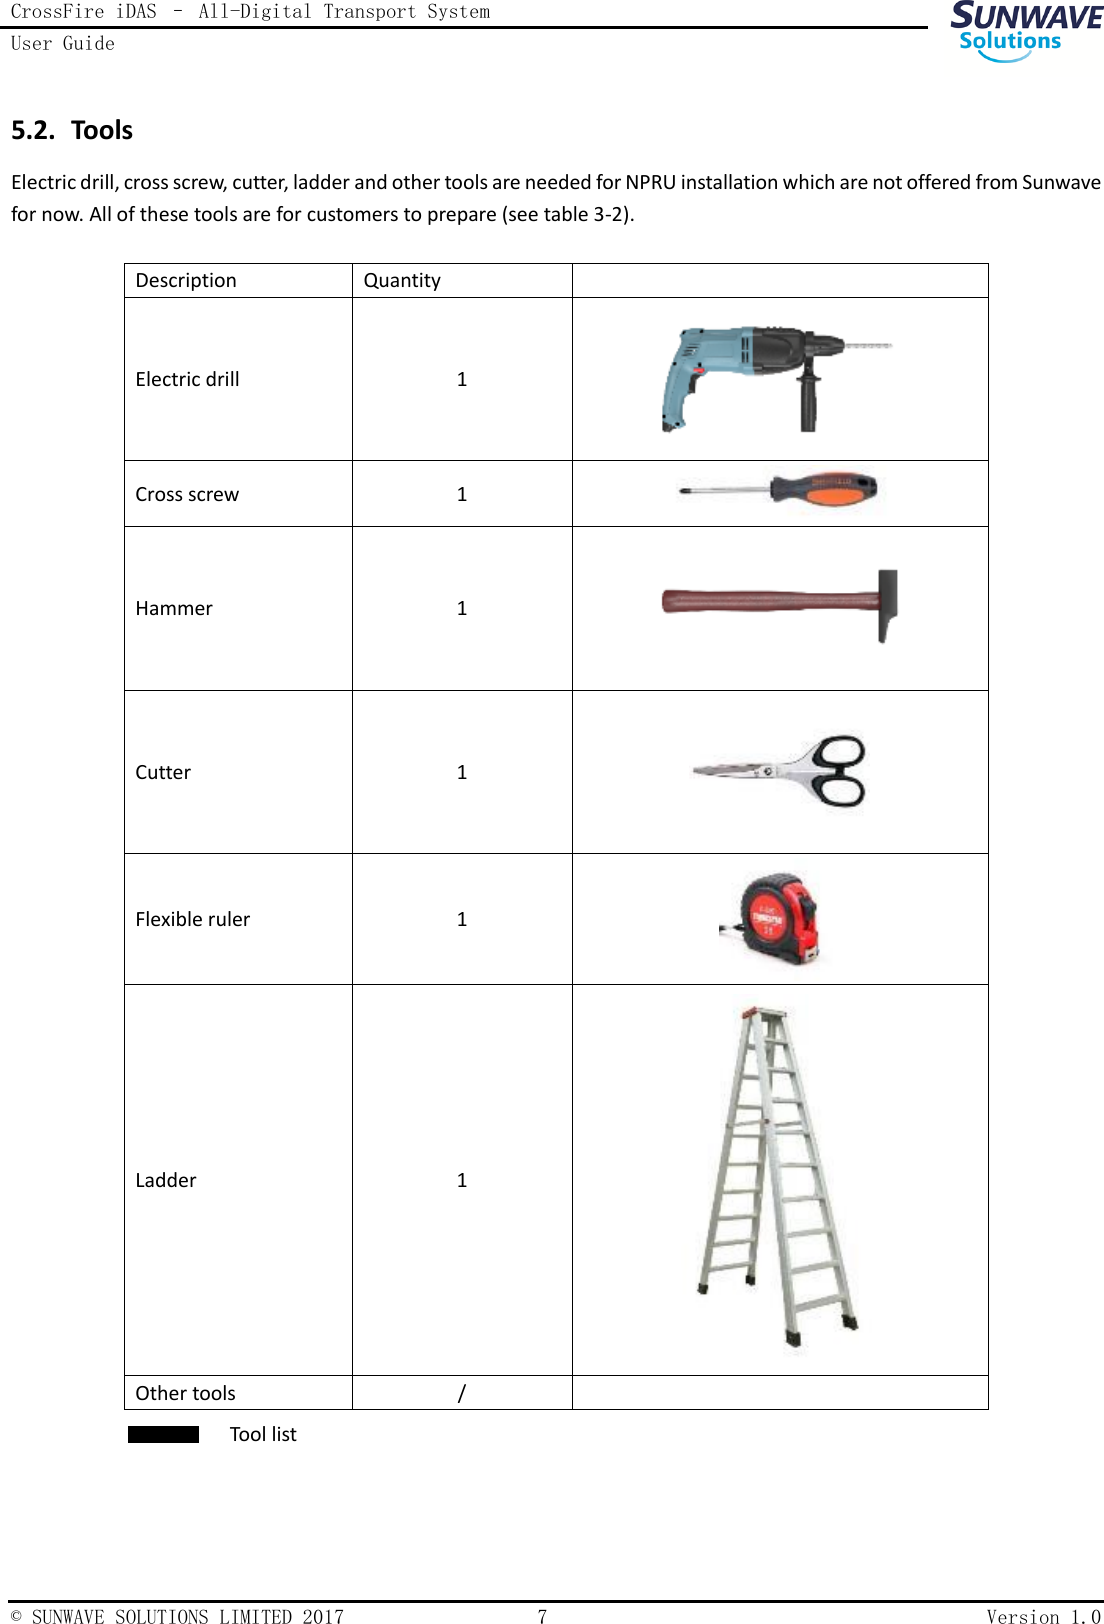 CrossFire iDAS – All-Digital Transport System User Guide    © SUNWAVE SOLUTIONS LIMITED 2017  7  Version 1.0  5.2. Tools Electric drill, cross screw, cutter, ladder and other tools are needed for NPRU installation which are not offered from Sunwave for now. All of these tools are for customers to prepare (see table 3-2).  Description Quantity  Electric drill 1  Cross screw 1  Hammer 1  Cutter 1  Flexible ruler 1  Ladder 1  Other tools /   Tool list   